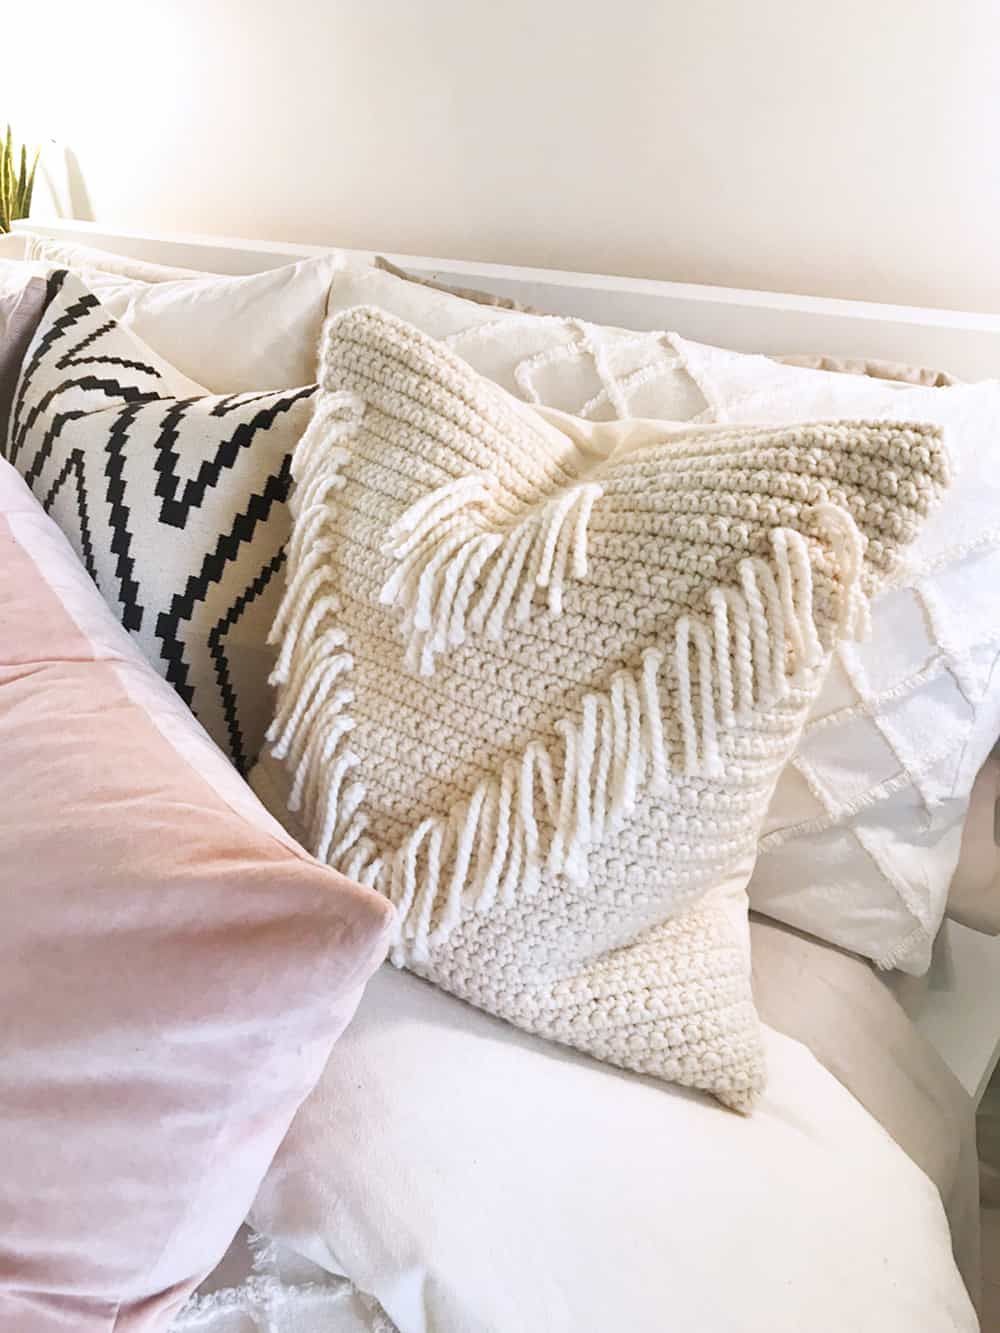 50 DIY pillows to jazz up your decor - Ohoh deco - 50 DIY pillows to jazz up your decor - Ohoh deco -   19 diy Pillows with tassels ideas